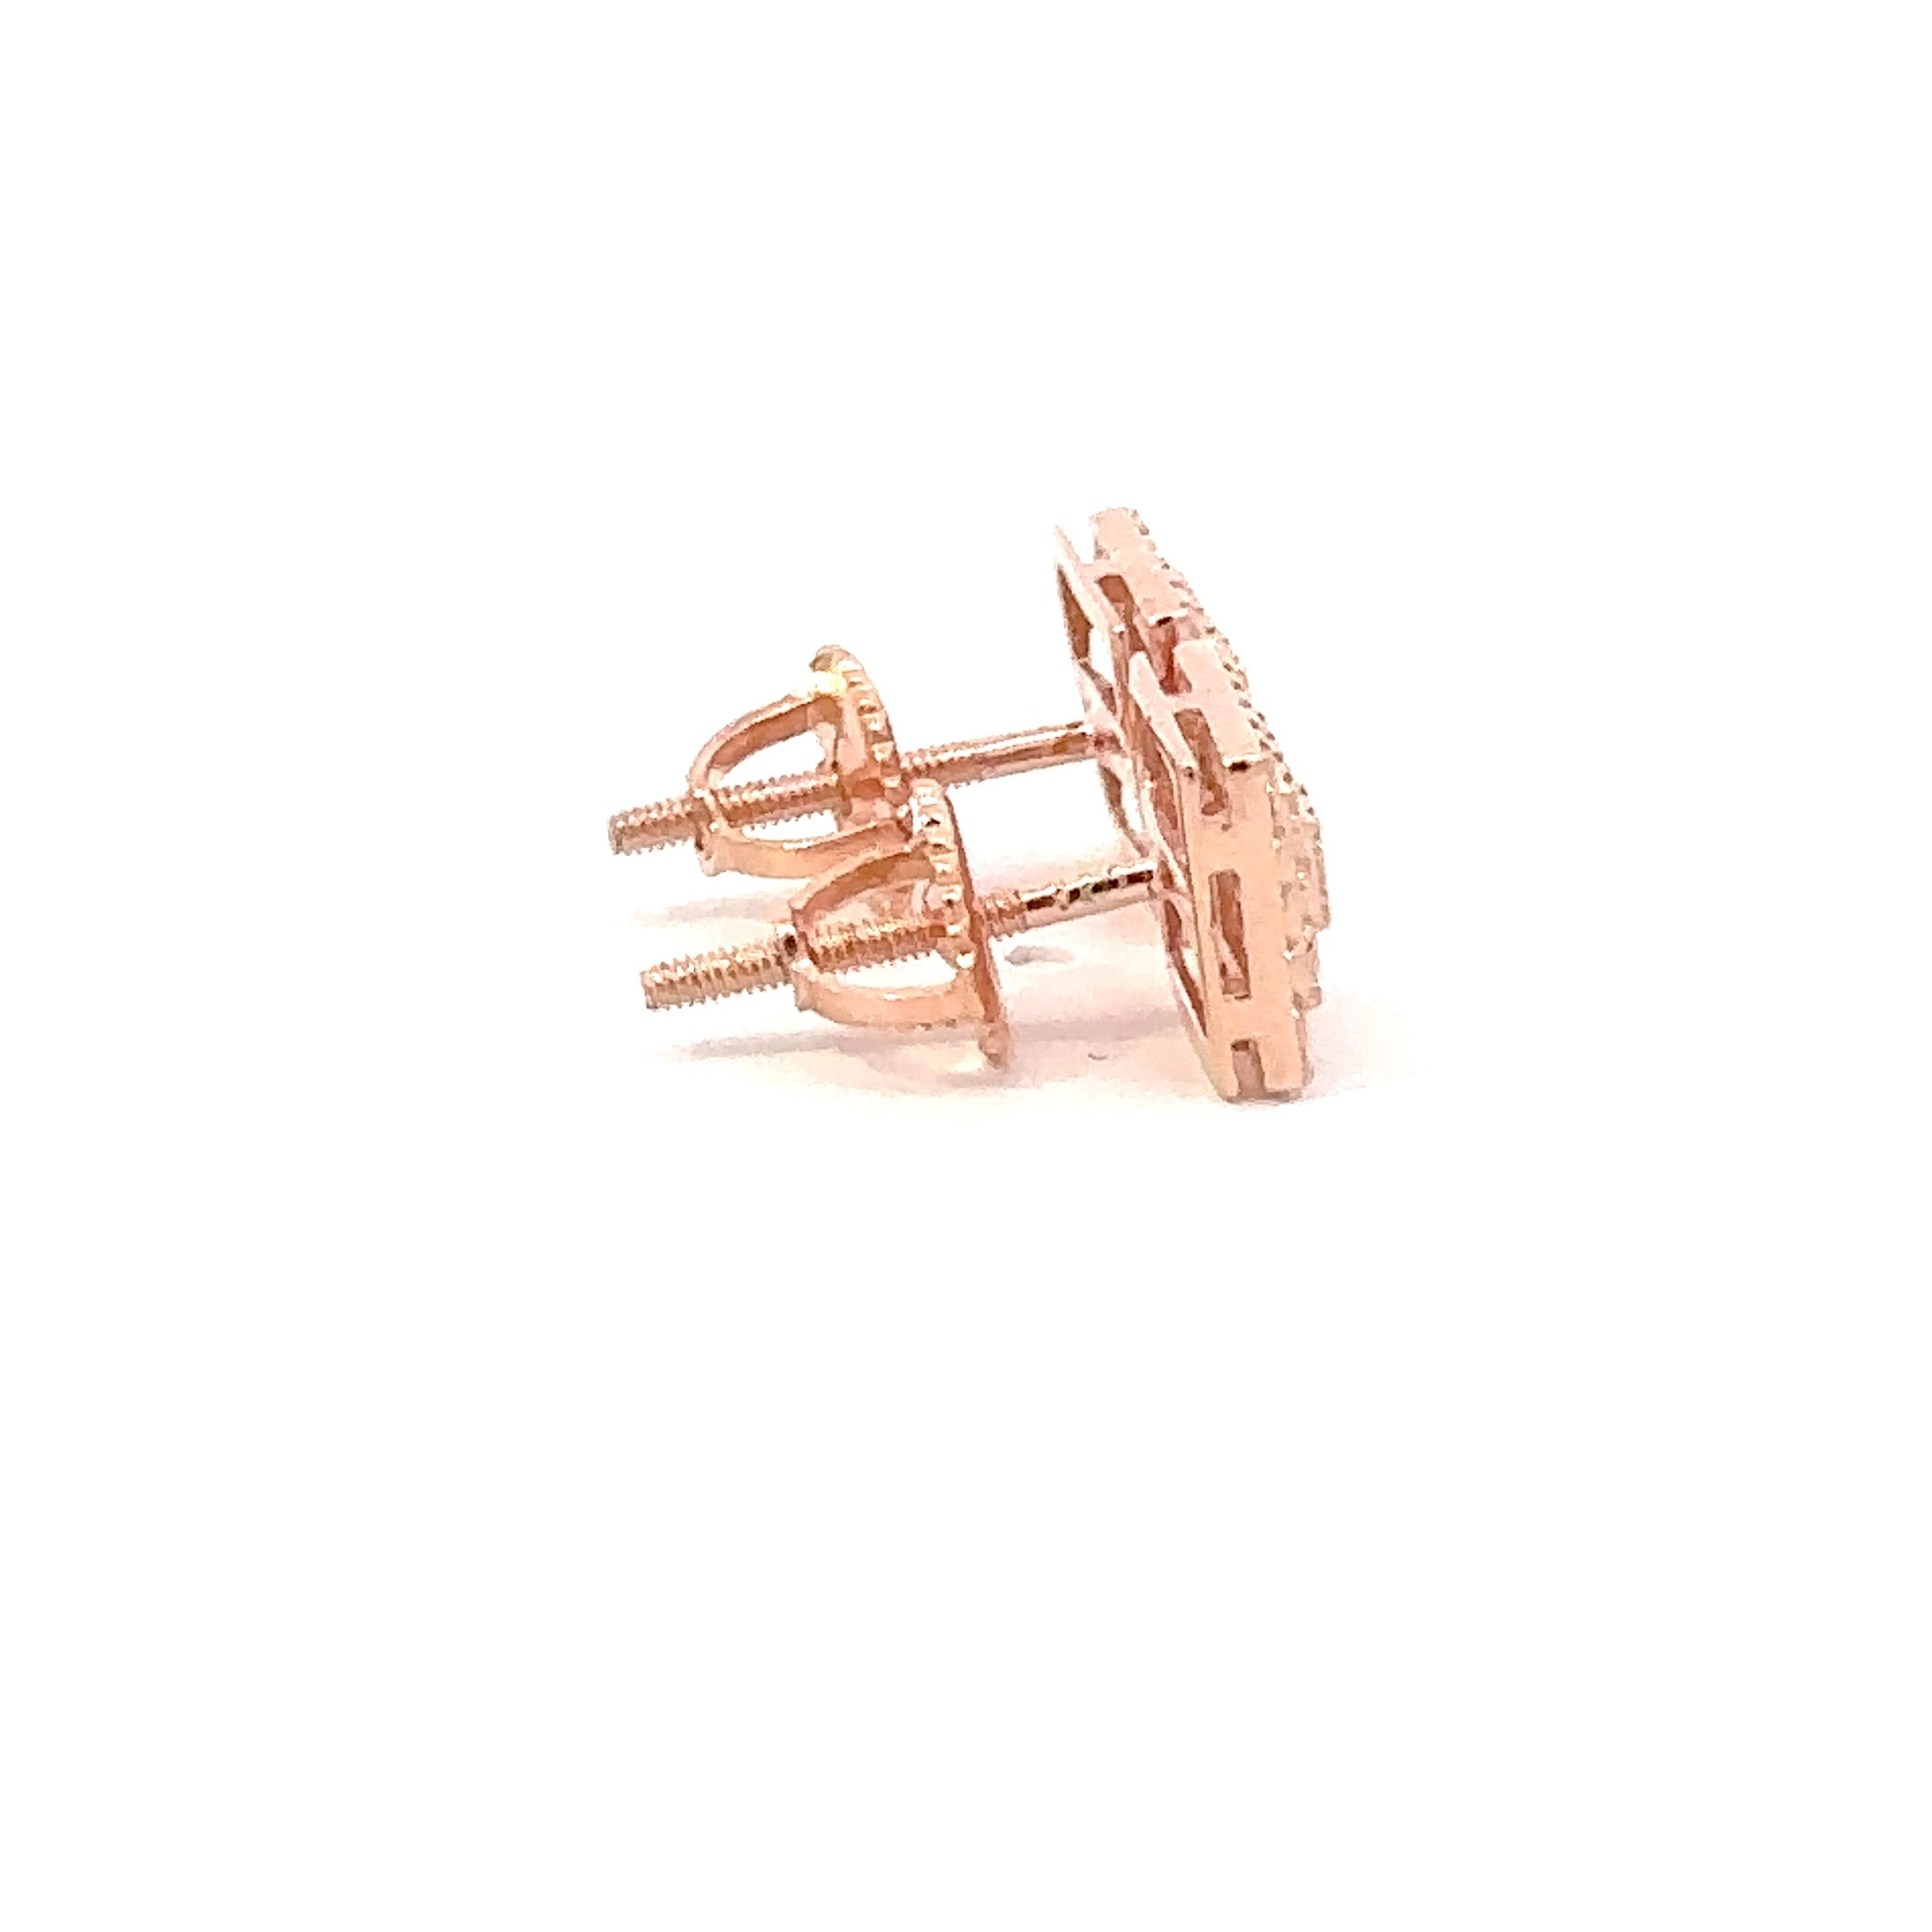 CYRENE 925 CZ ROSE GOLD ICED OUT EARRINGS | 9212675